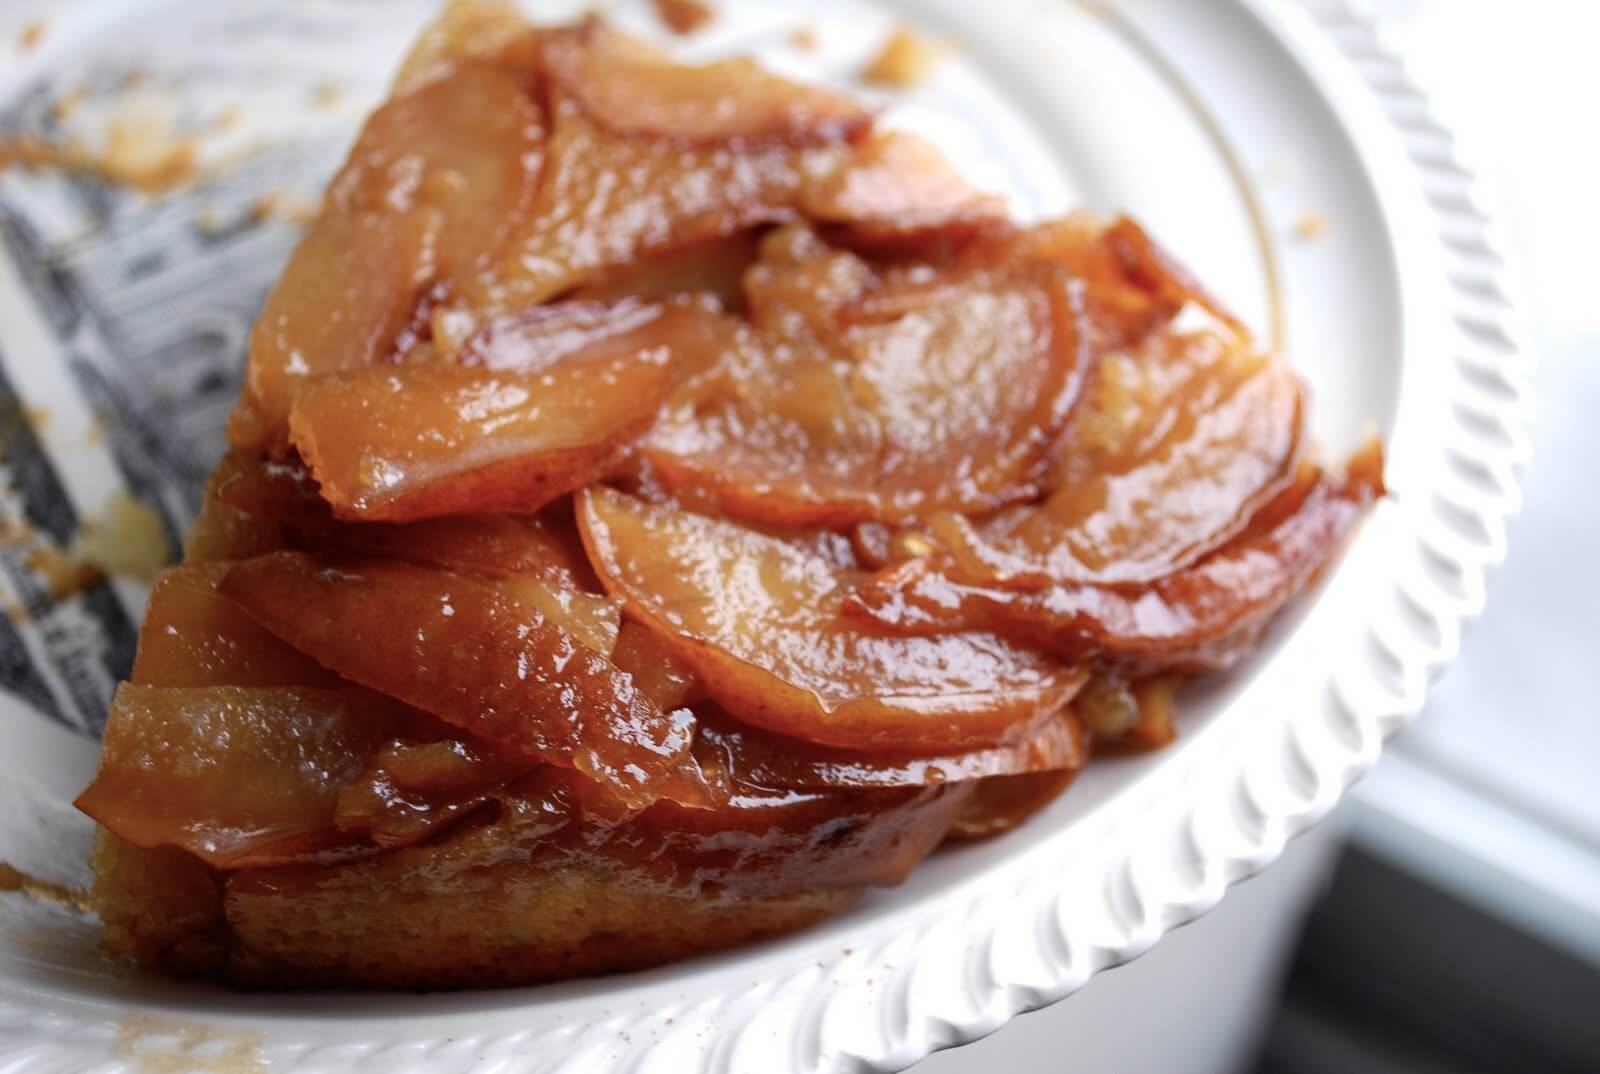 Part cake, part pudding, this tender apple and pear upside-down cake is suffused with vanilla bean and the flavors of perfectly ripe apples and pears. 